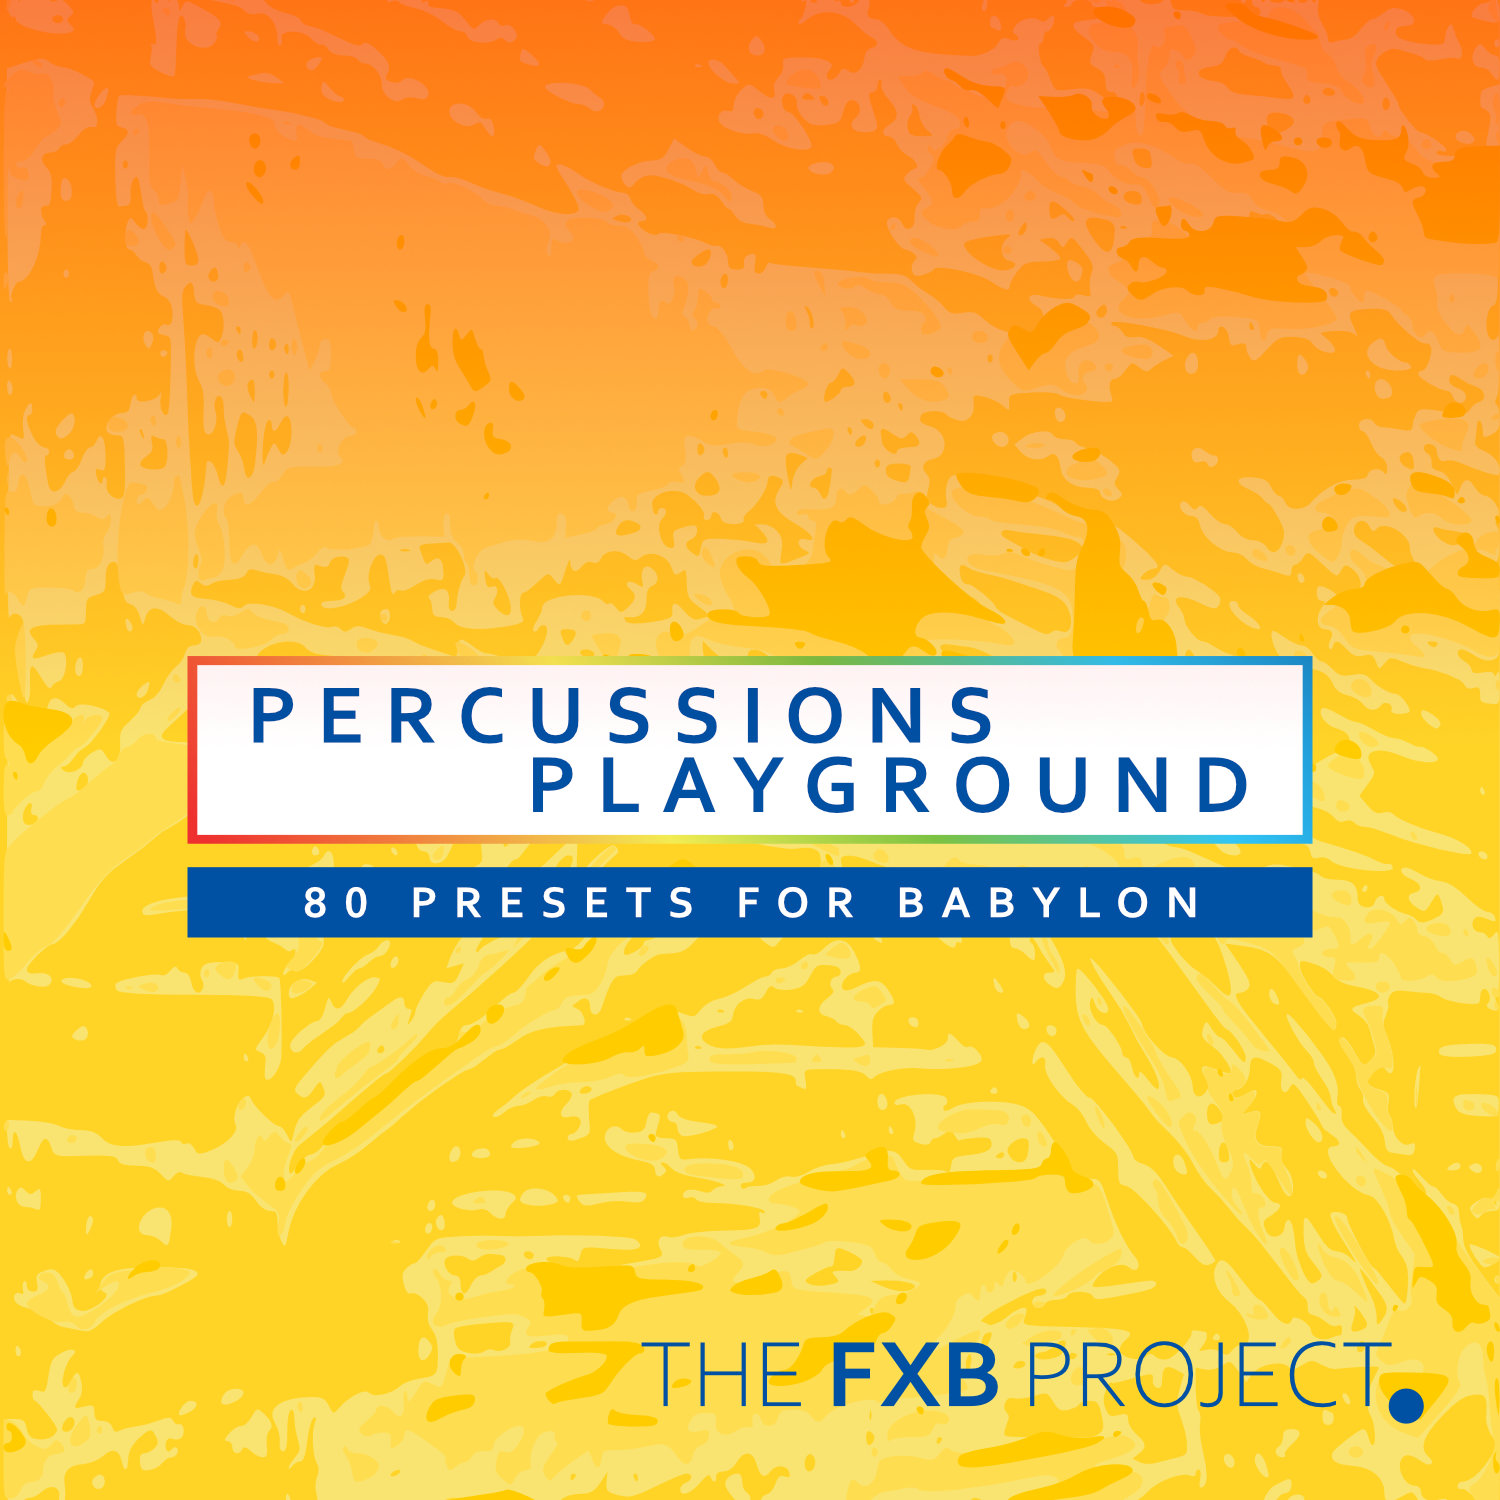 The FXB Project Percussions Playground presets pack for Babylon